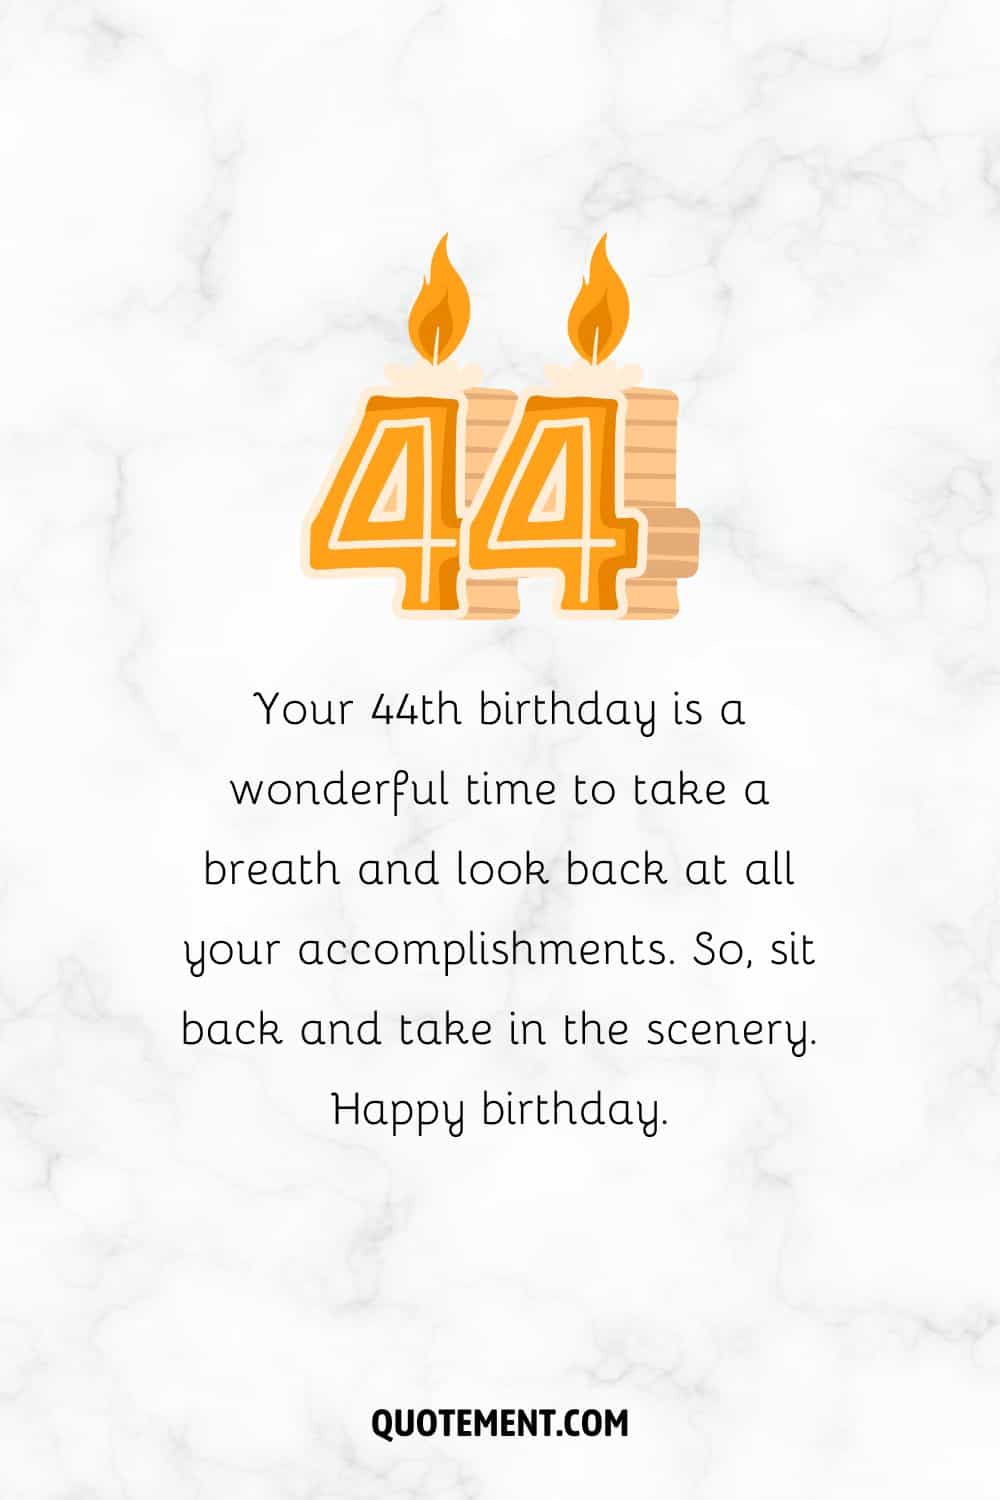 Your 44th birthday is a wonderful time to take a breath and look back at all your accomplishments.